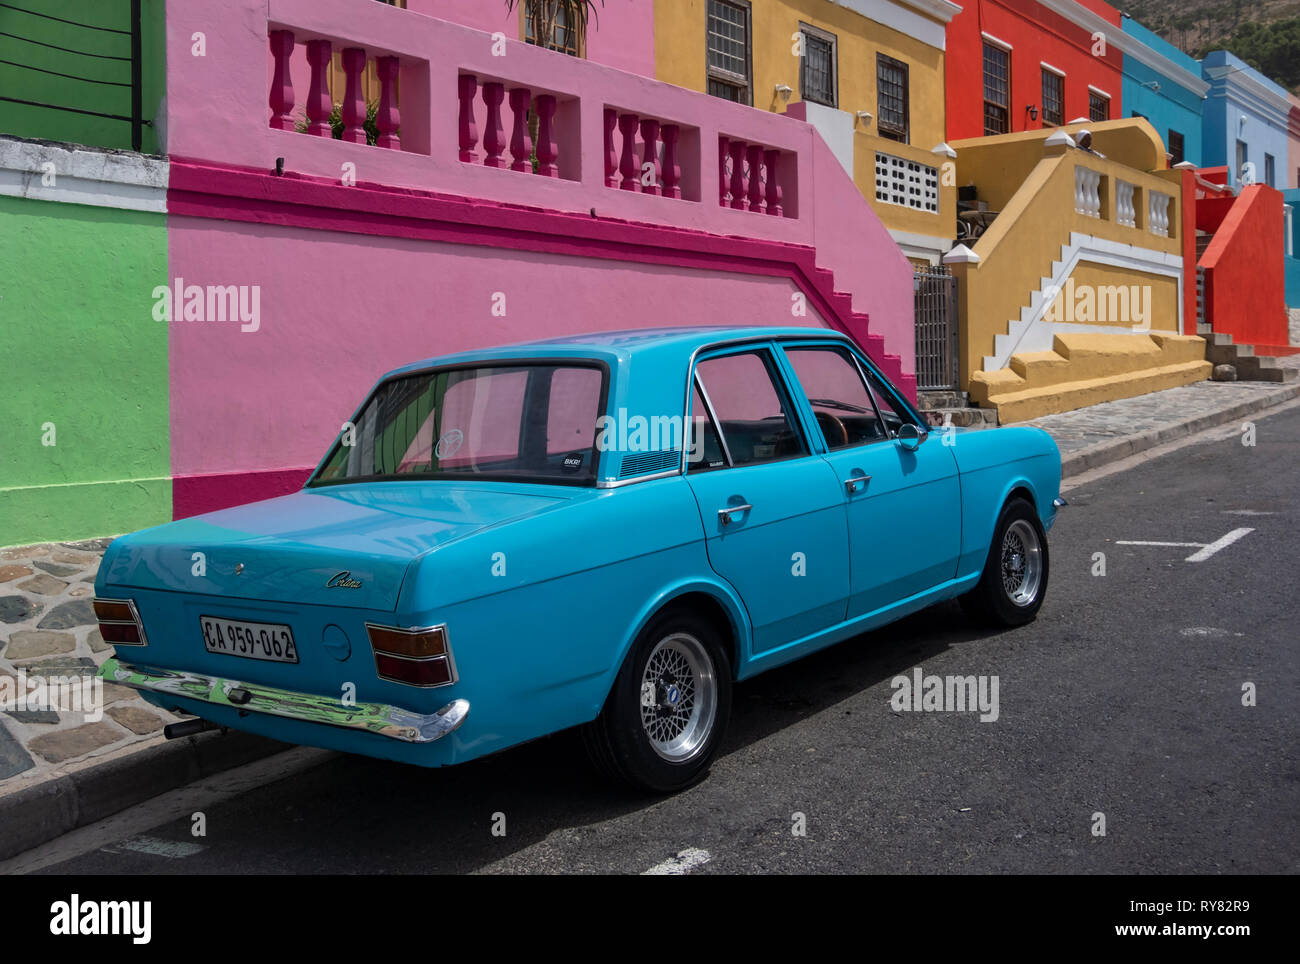 Old Blue Ford Cortina Car in front of Multi Coloured Houses of Bo Kaap, Cape Town, Western Cape, South Africa Stock Photo